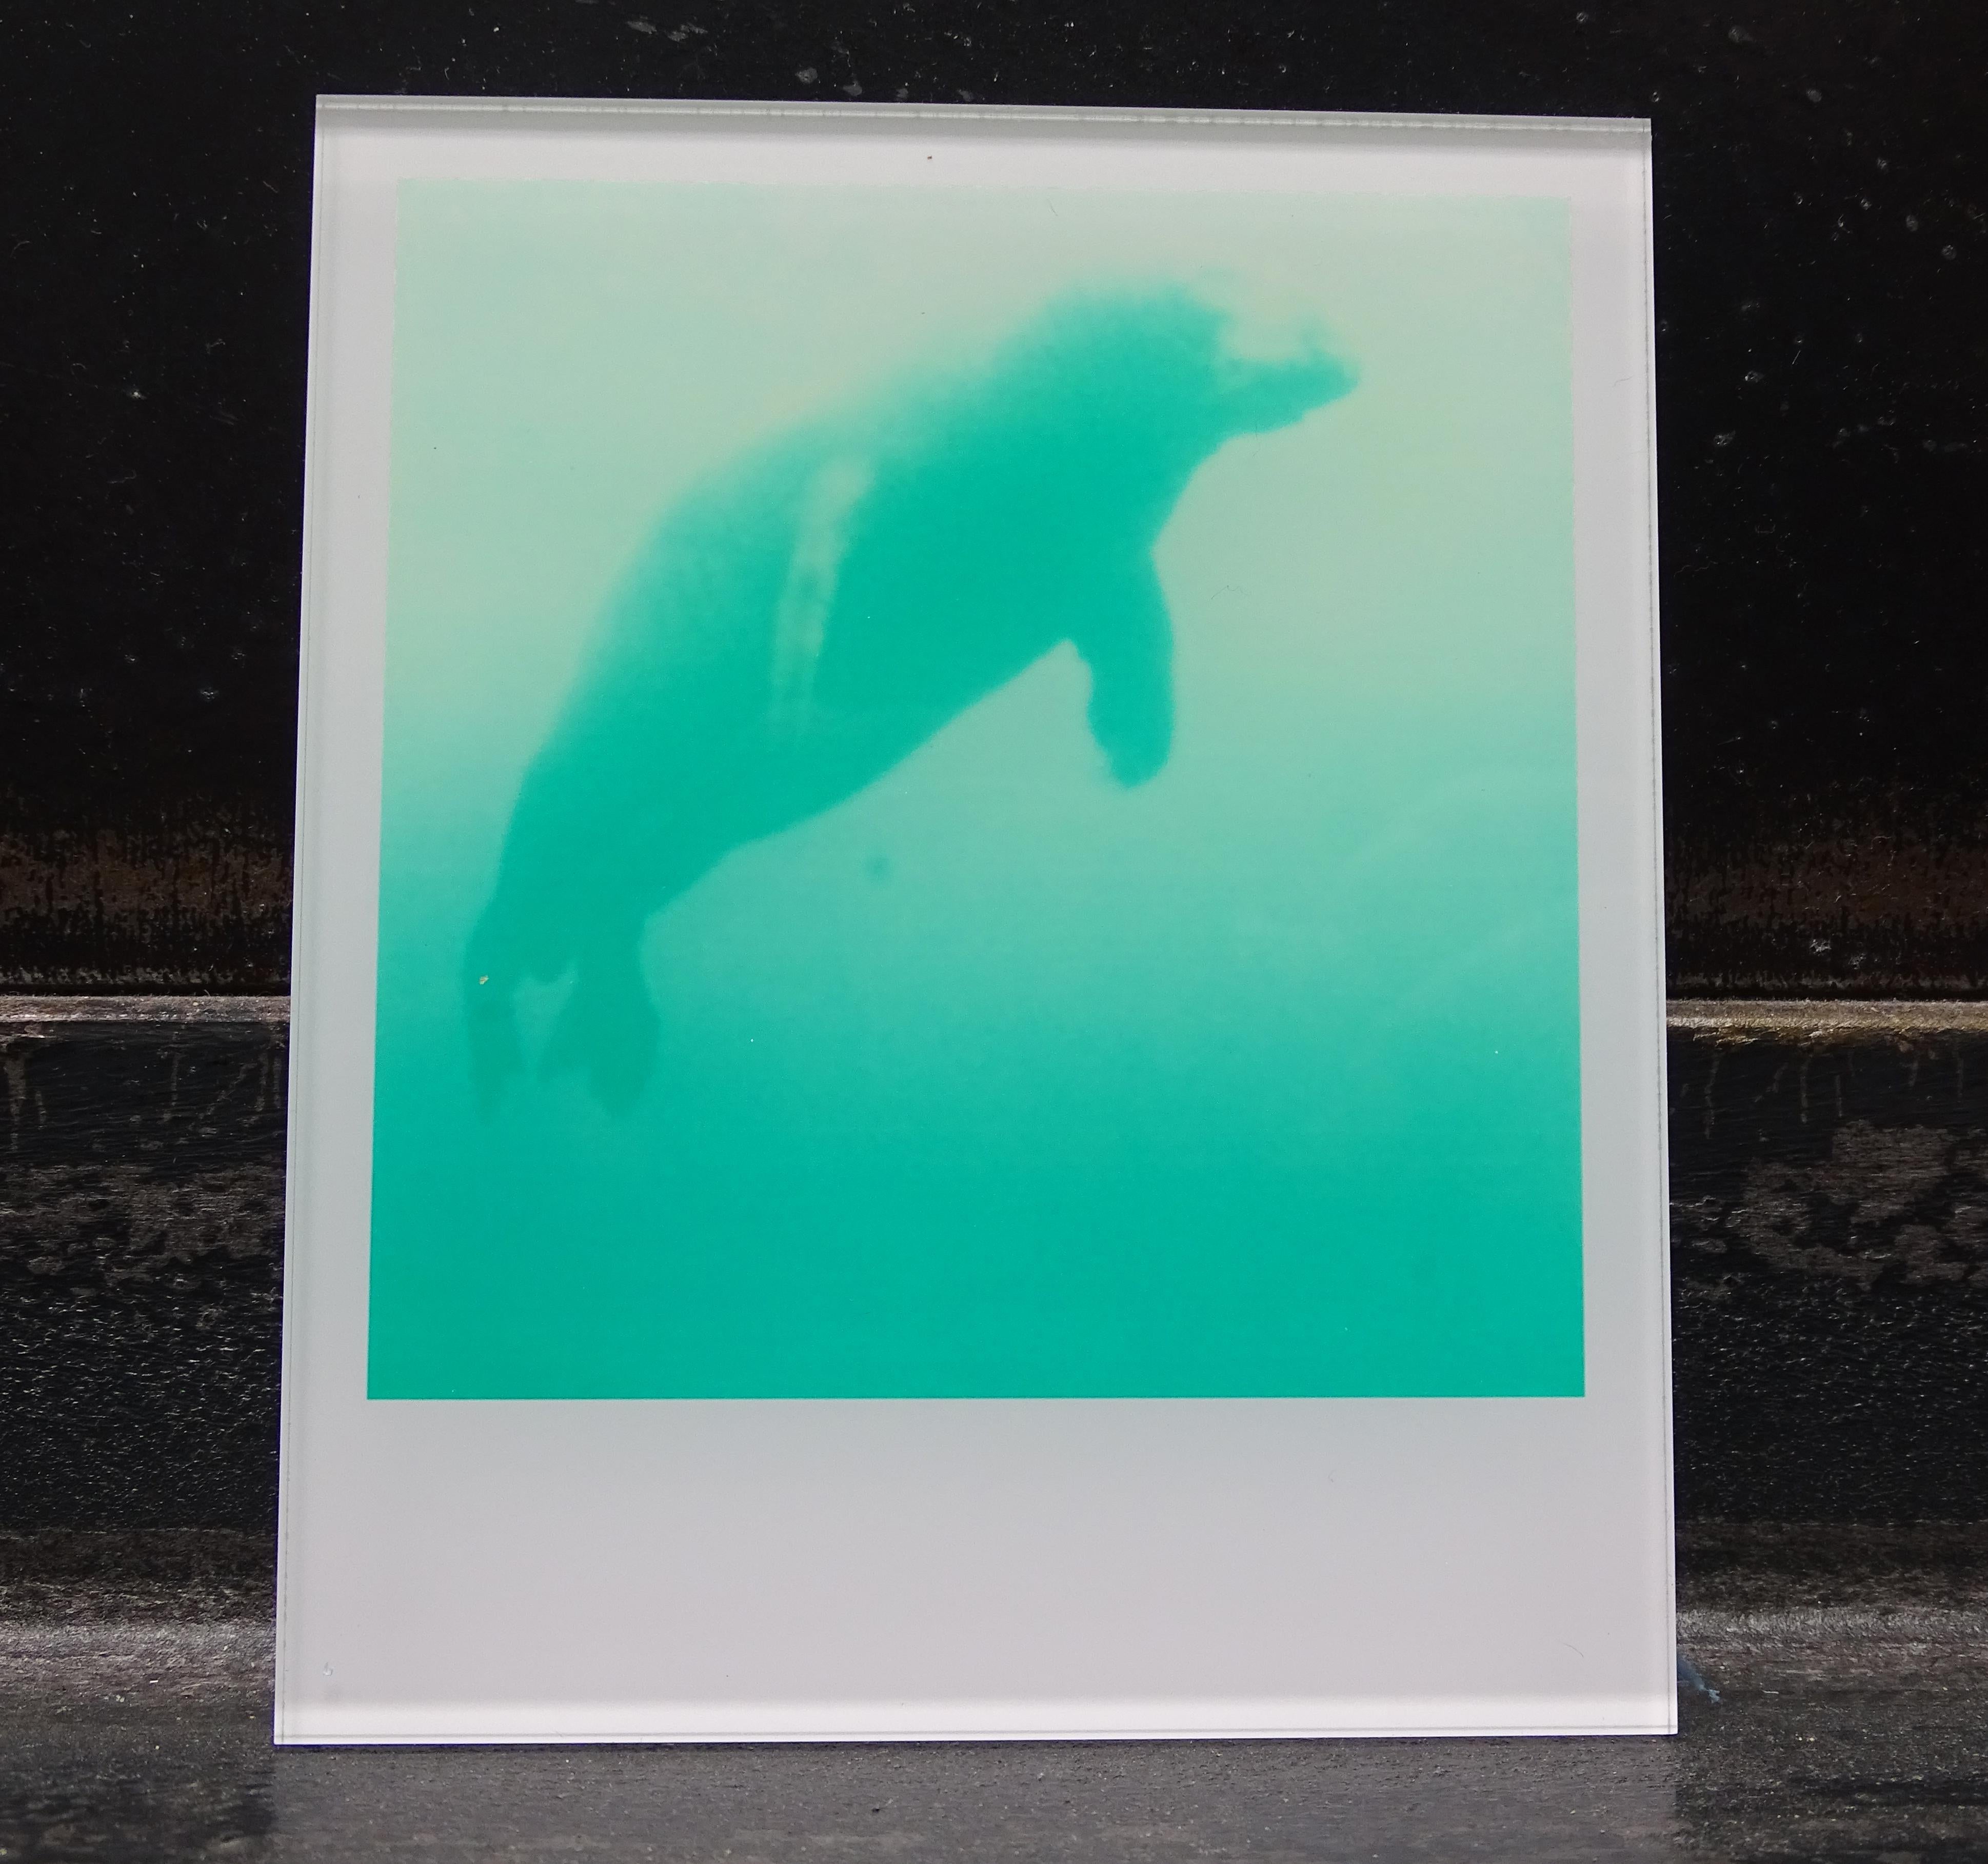 Stefanie Schneider's Minis

Skywhale (Stay), 2006
signed and signature brand on verso
Lambda digital Color Photographs based on a Polaroid

from the movie 'Stay' by Marc Forster, featuring Ewan McGregor and Naomi Watts.

Polaroid sized open Editions